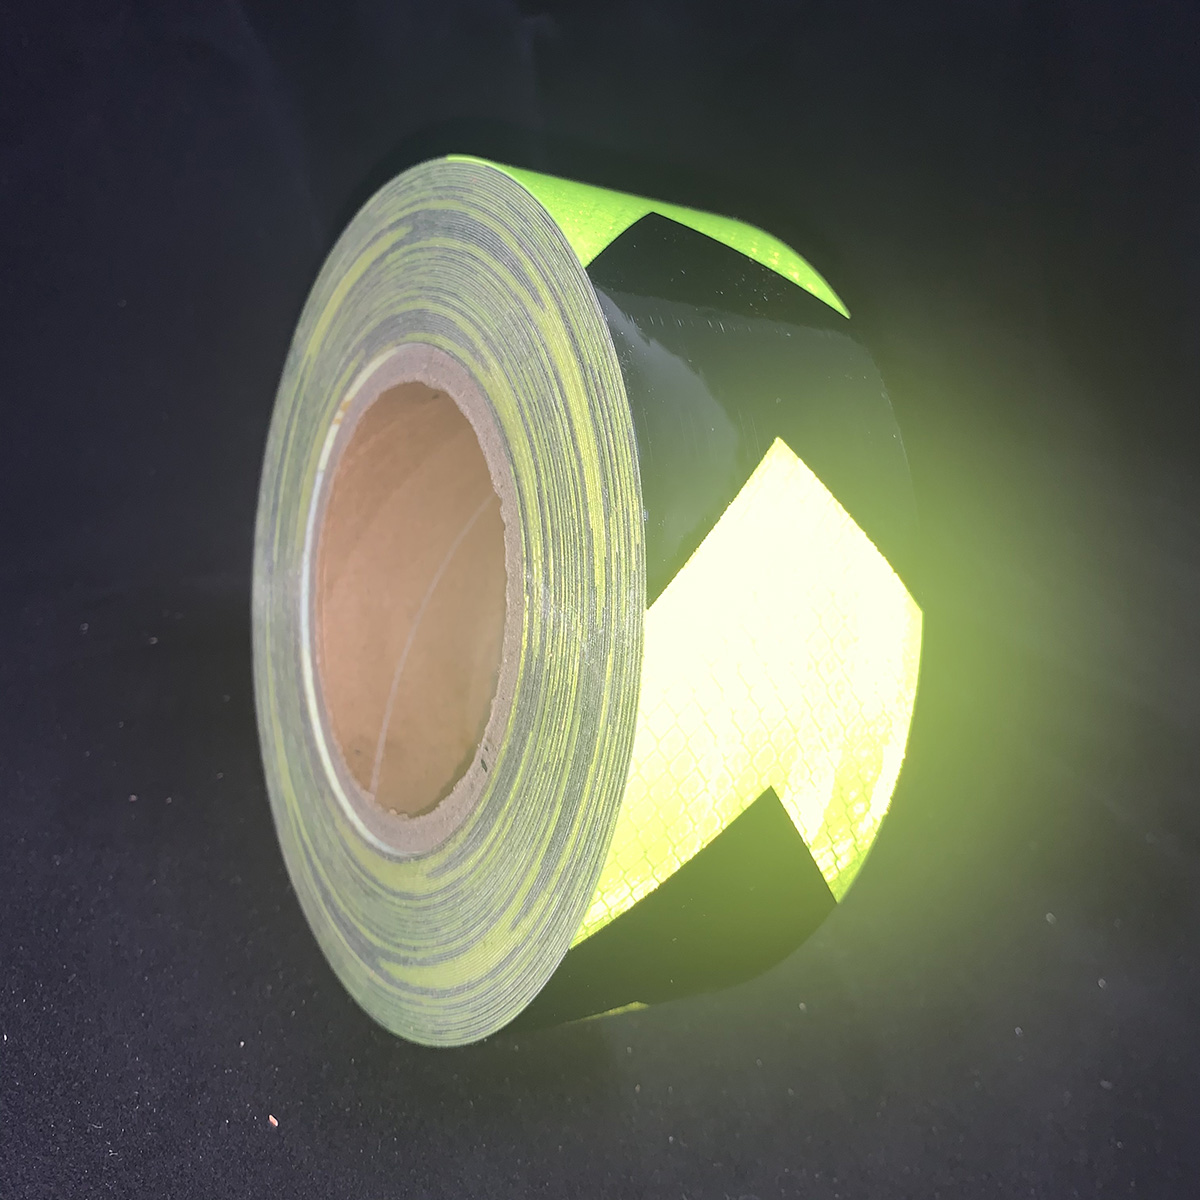 Fluo Green and Black 2'' x 82ft Micro Prismatic Arrow Reflective Sheeting